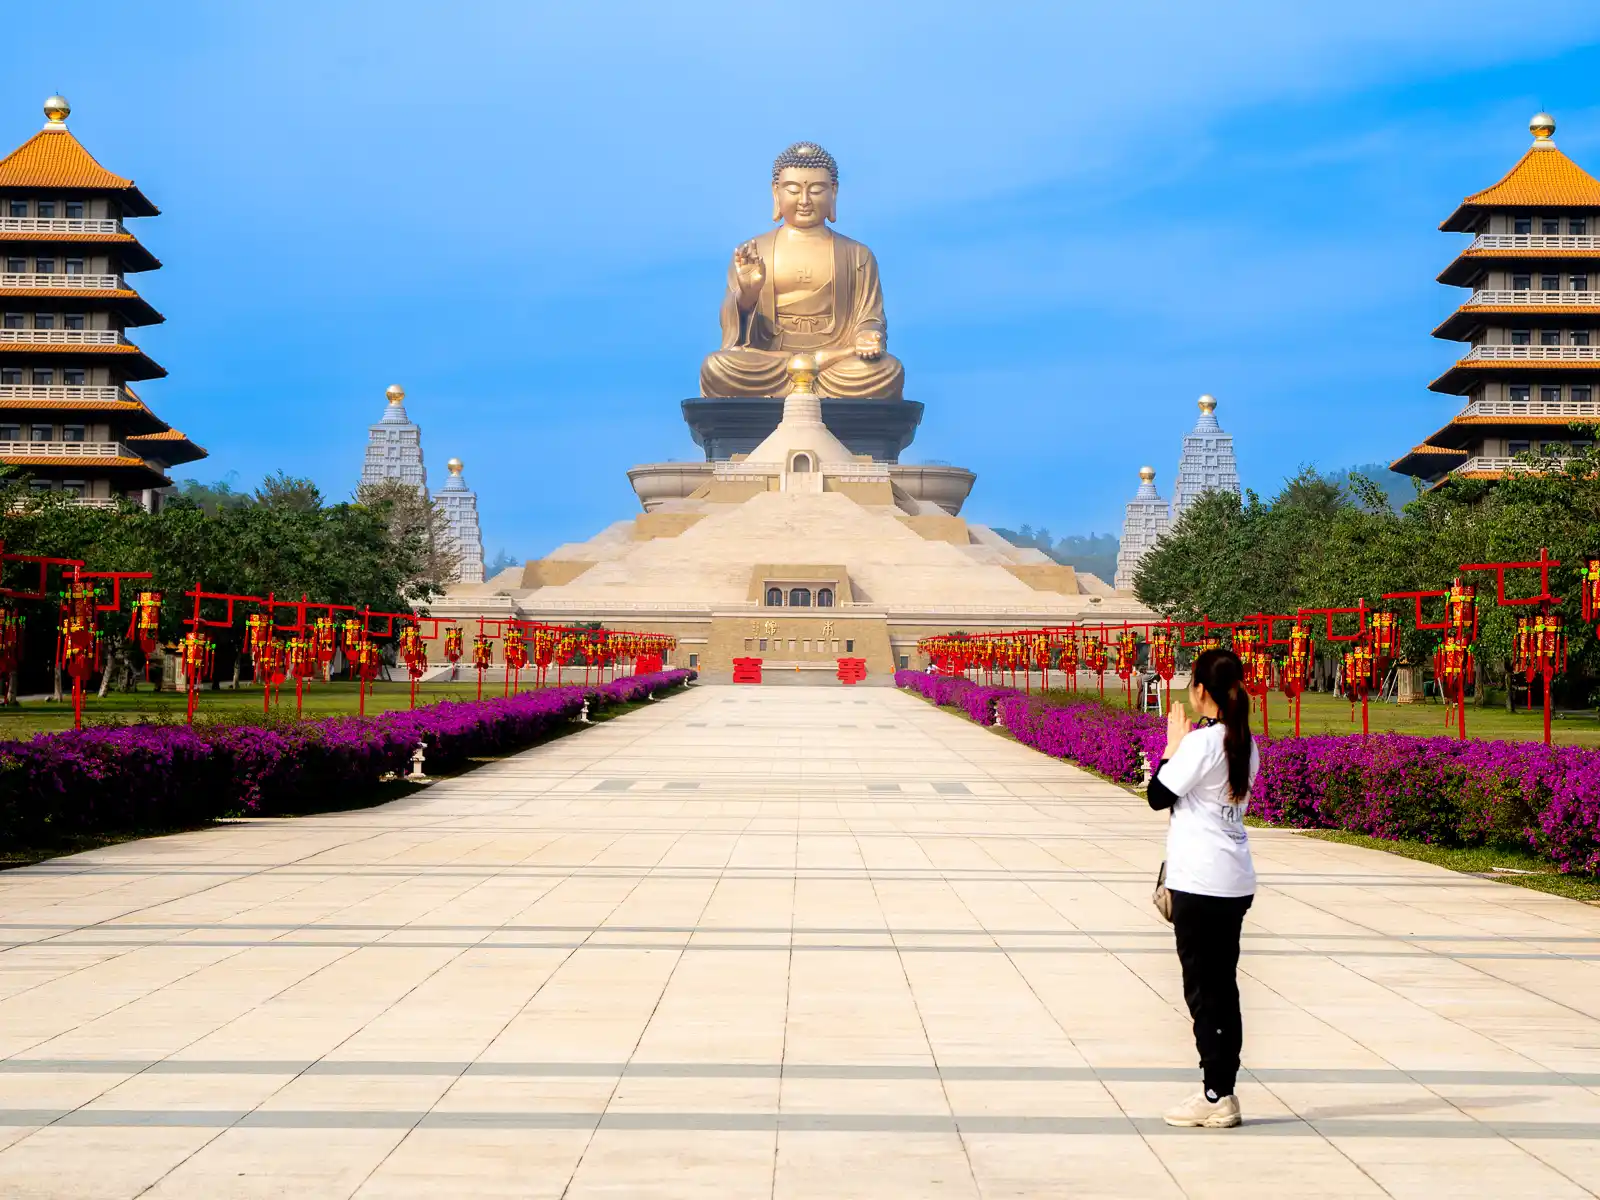 One tourist stands for a photo in front of the path to the Main Hall and Fo Guang Big Buddha.